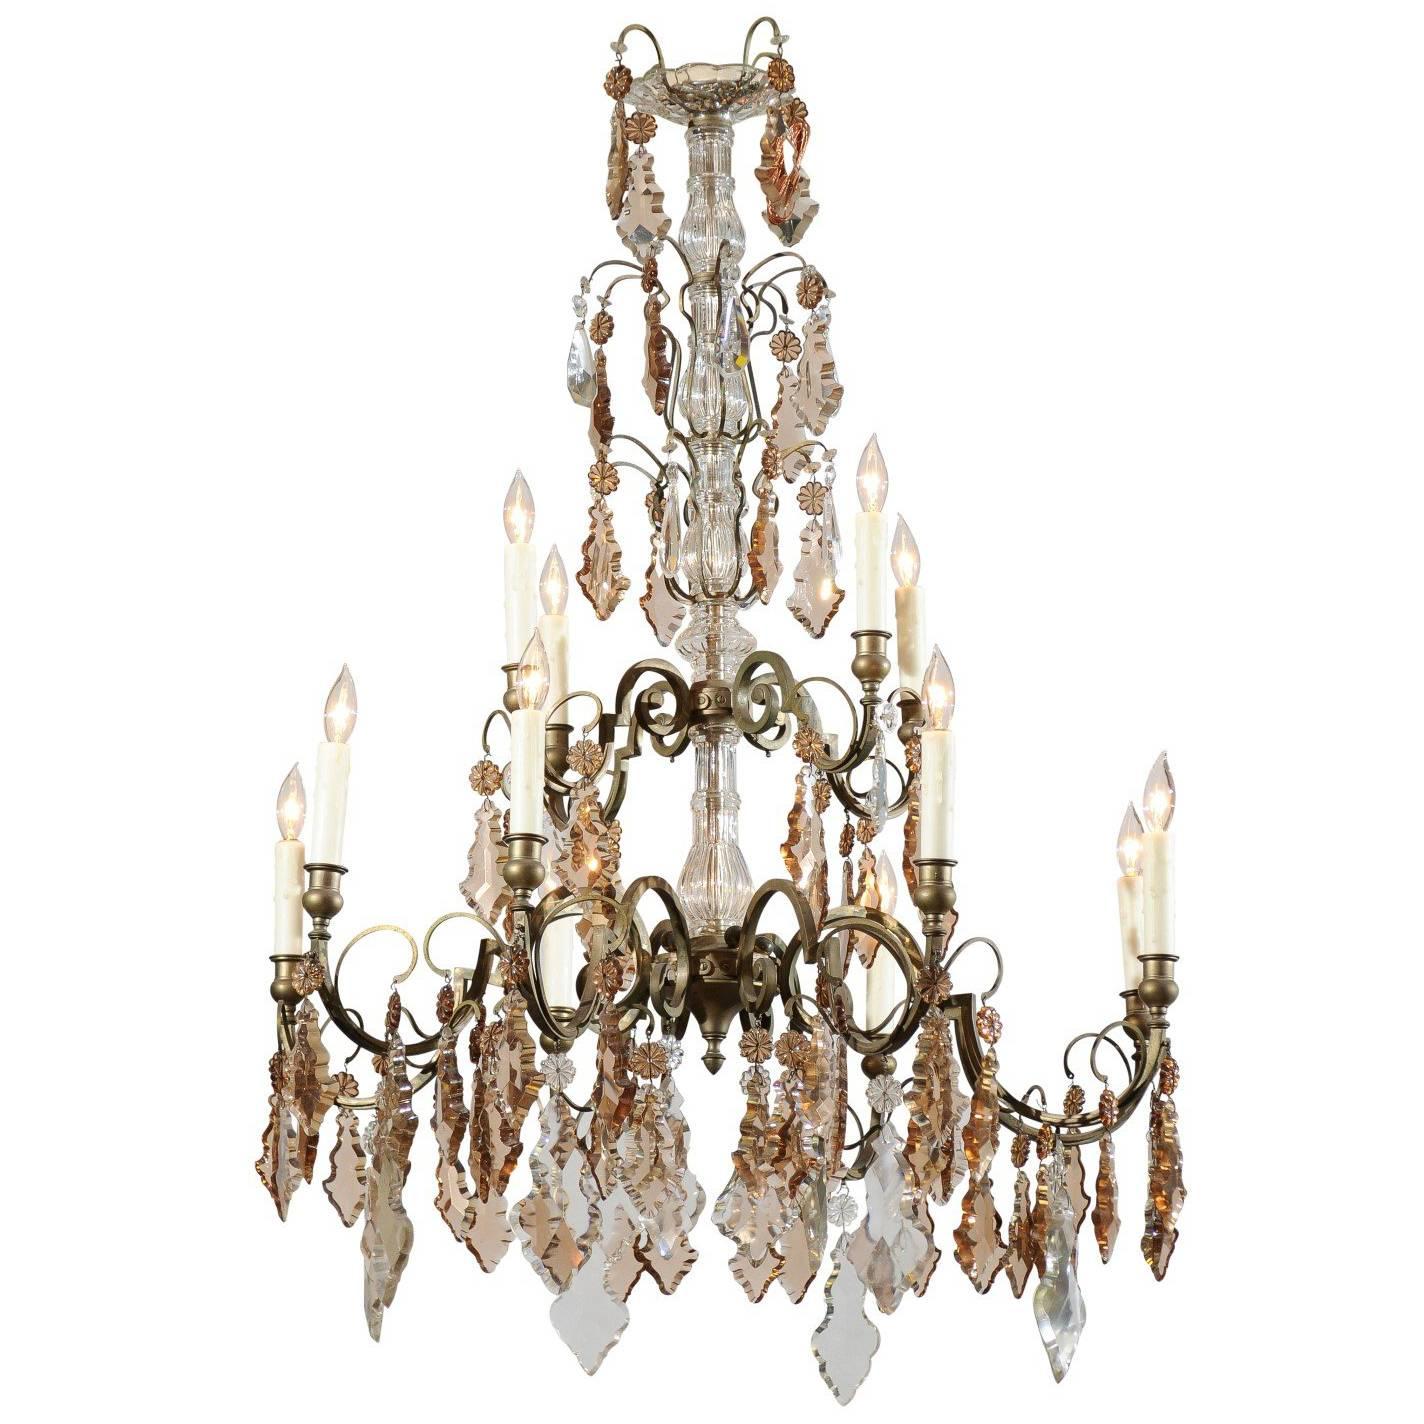 Vintage French Bronze and Crystal Chandelier with 12 Arms, circa 1940 For Sale